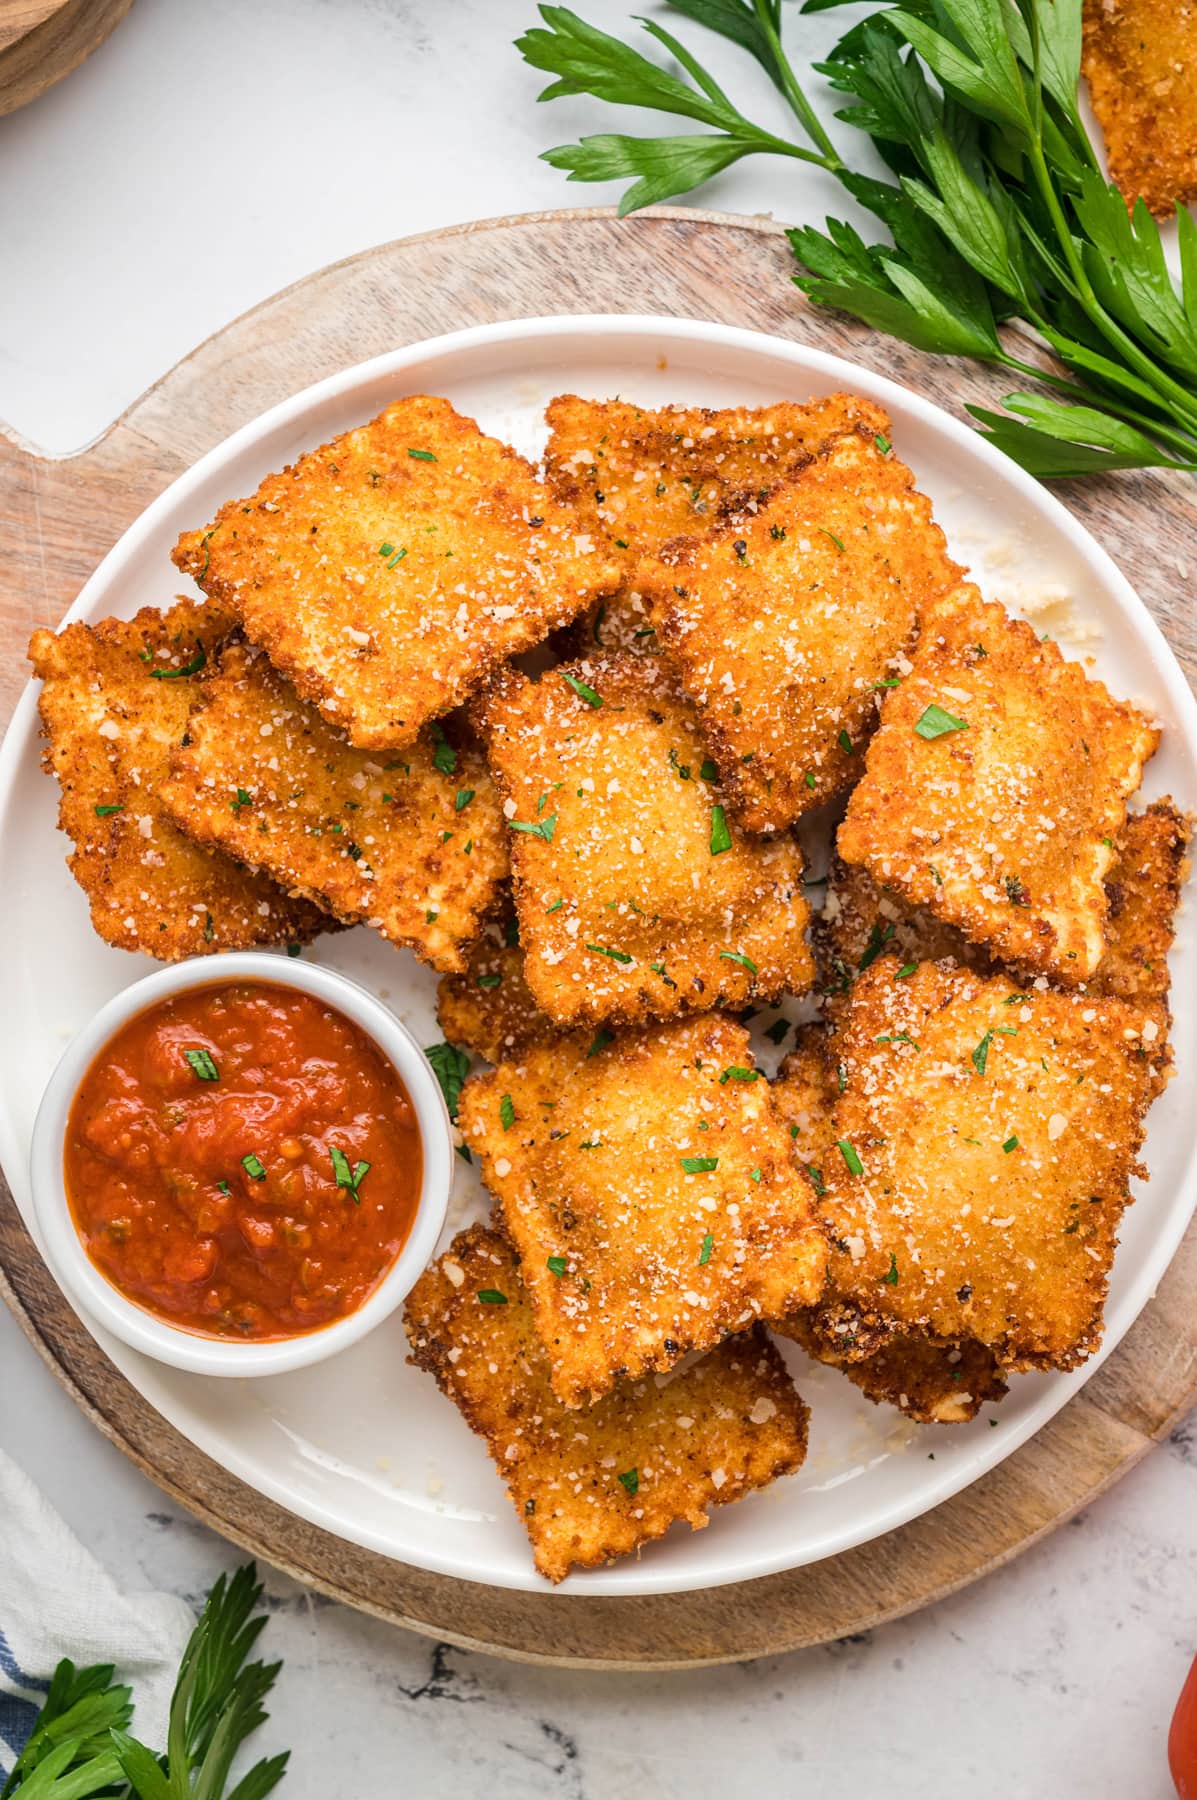 A plate of toasted ravioli with a dish of marinara sauce